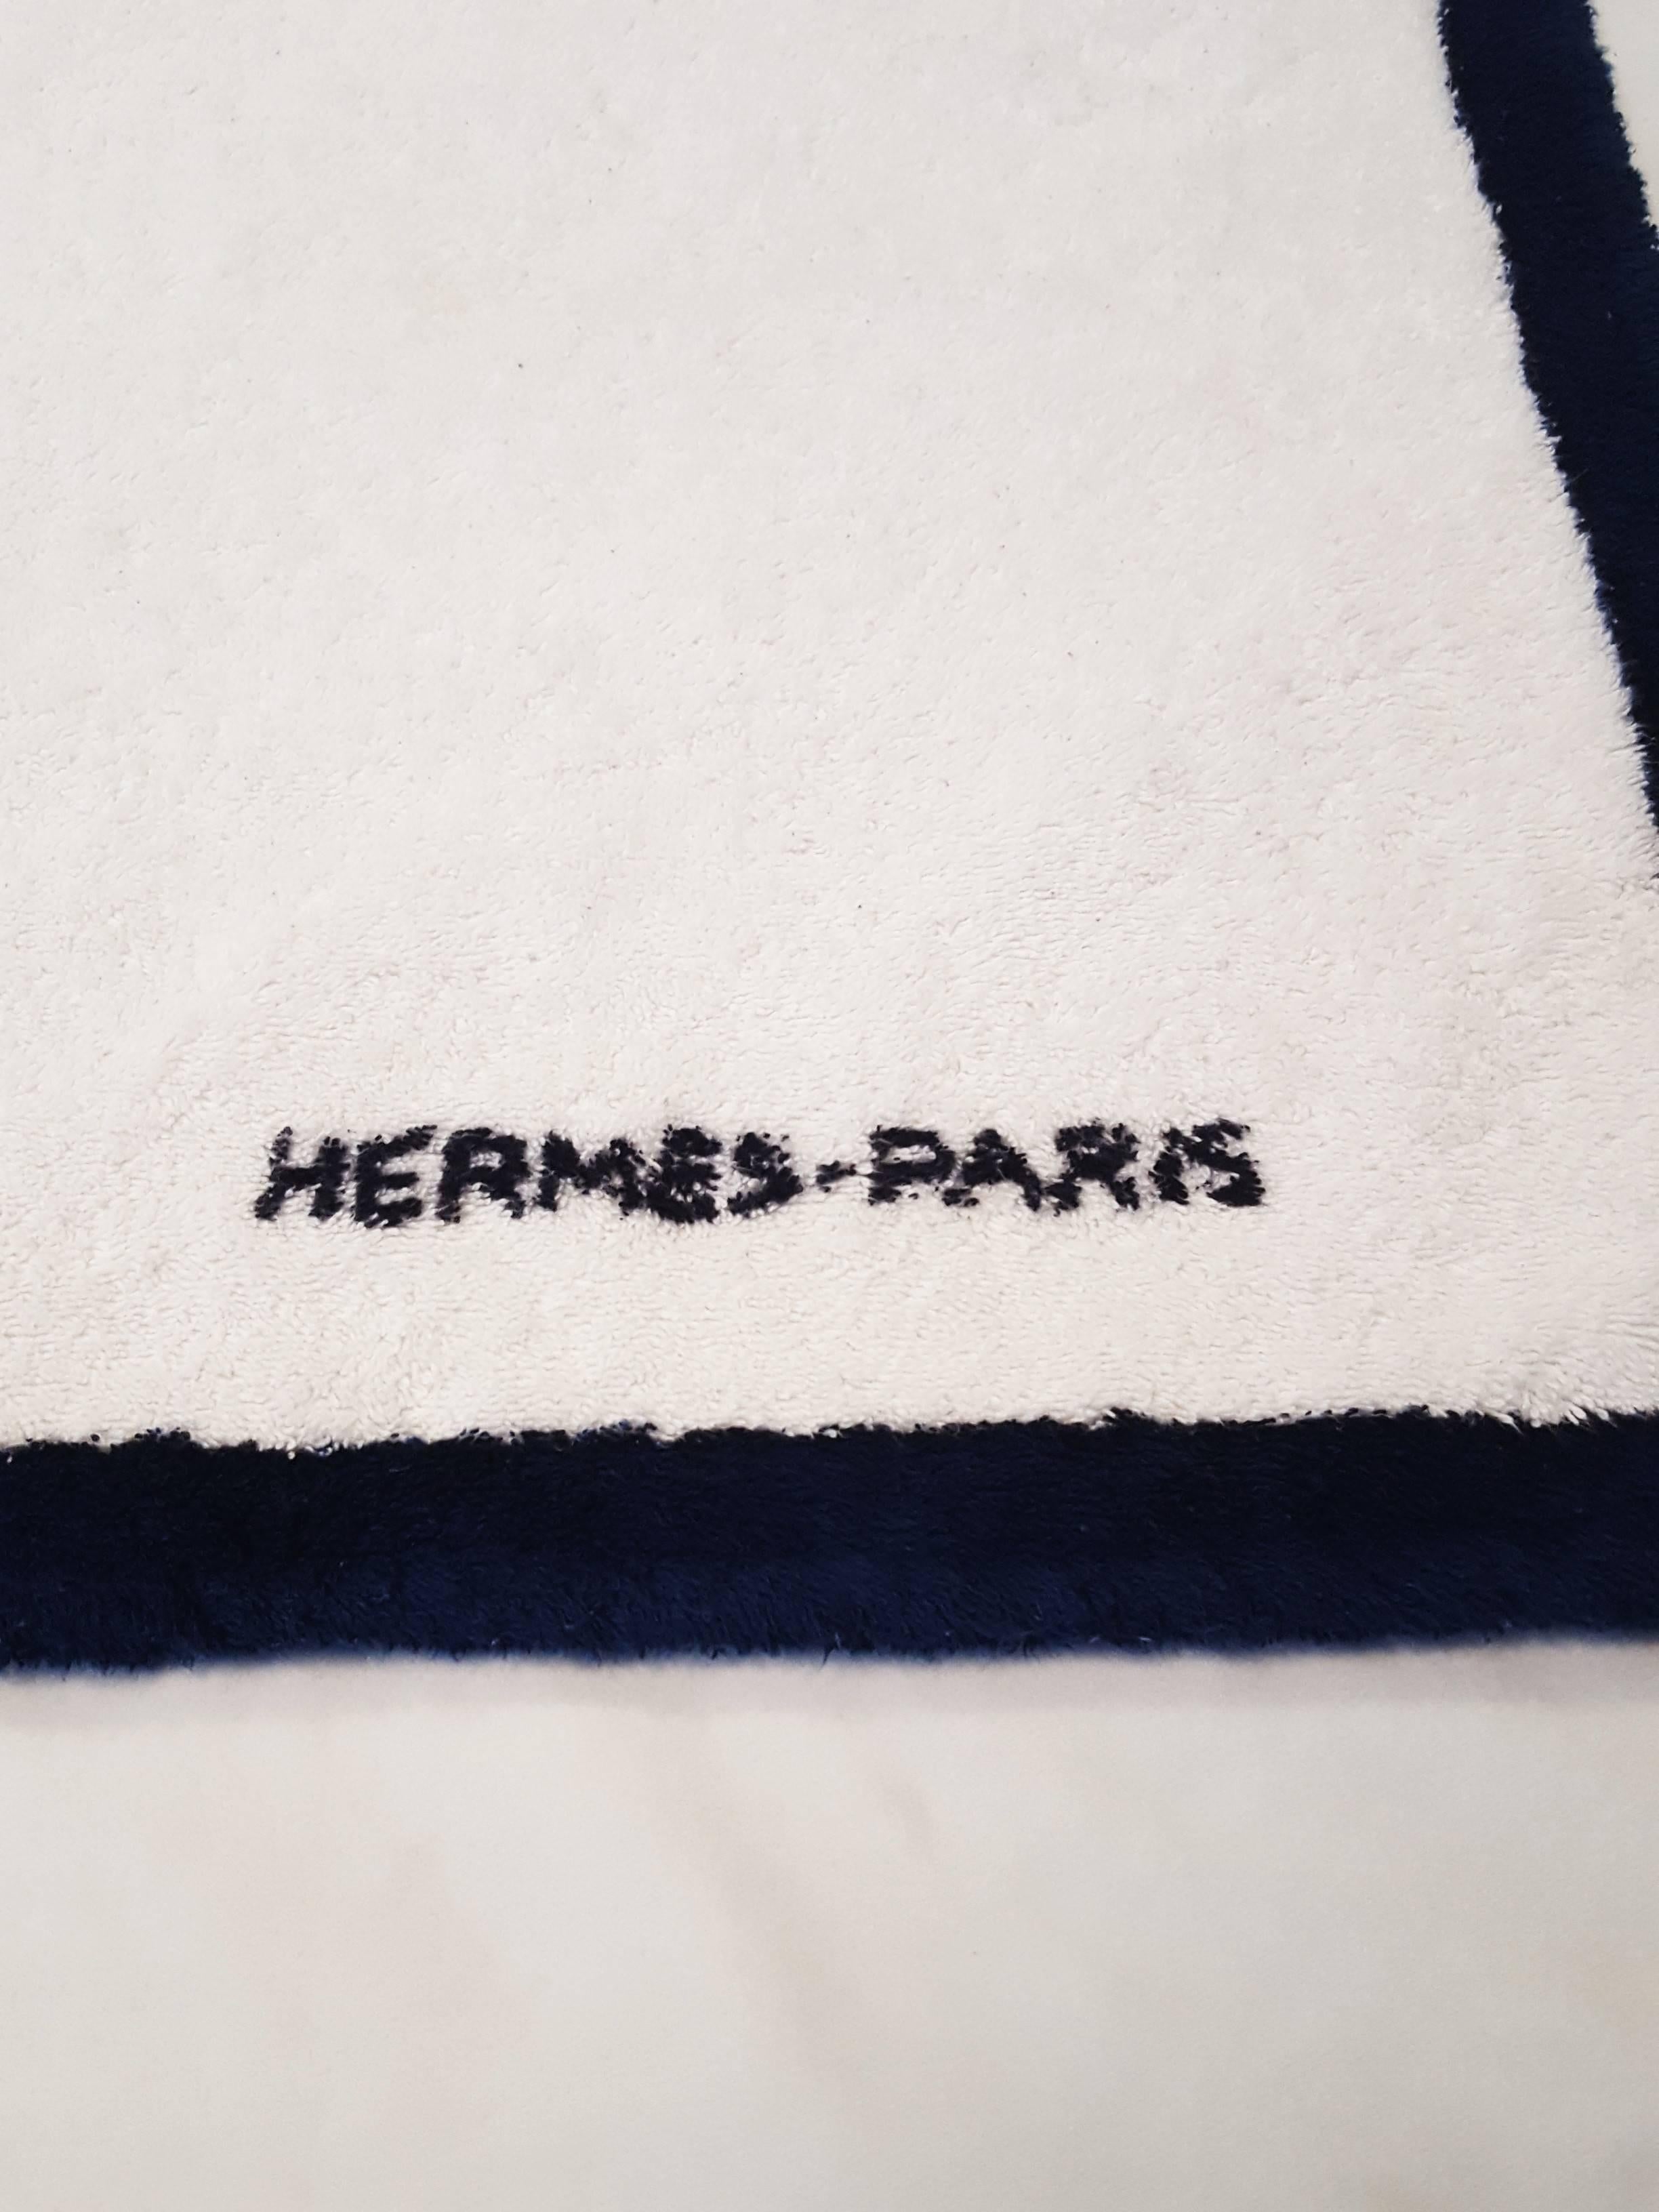 Presenting a rare Hermes Horse Beach Towel that will make a statement on the beach, at a resort, on a cruise, on your yacht or by the pool! Lush and thirsty 100 cotton! Colors feature 